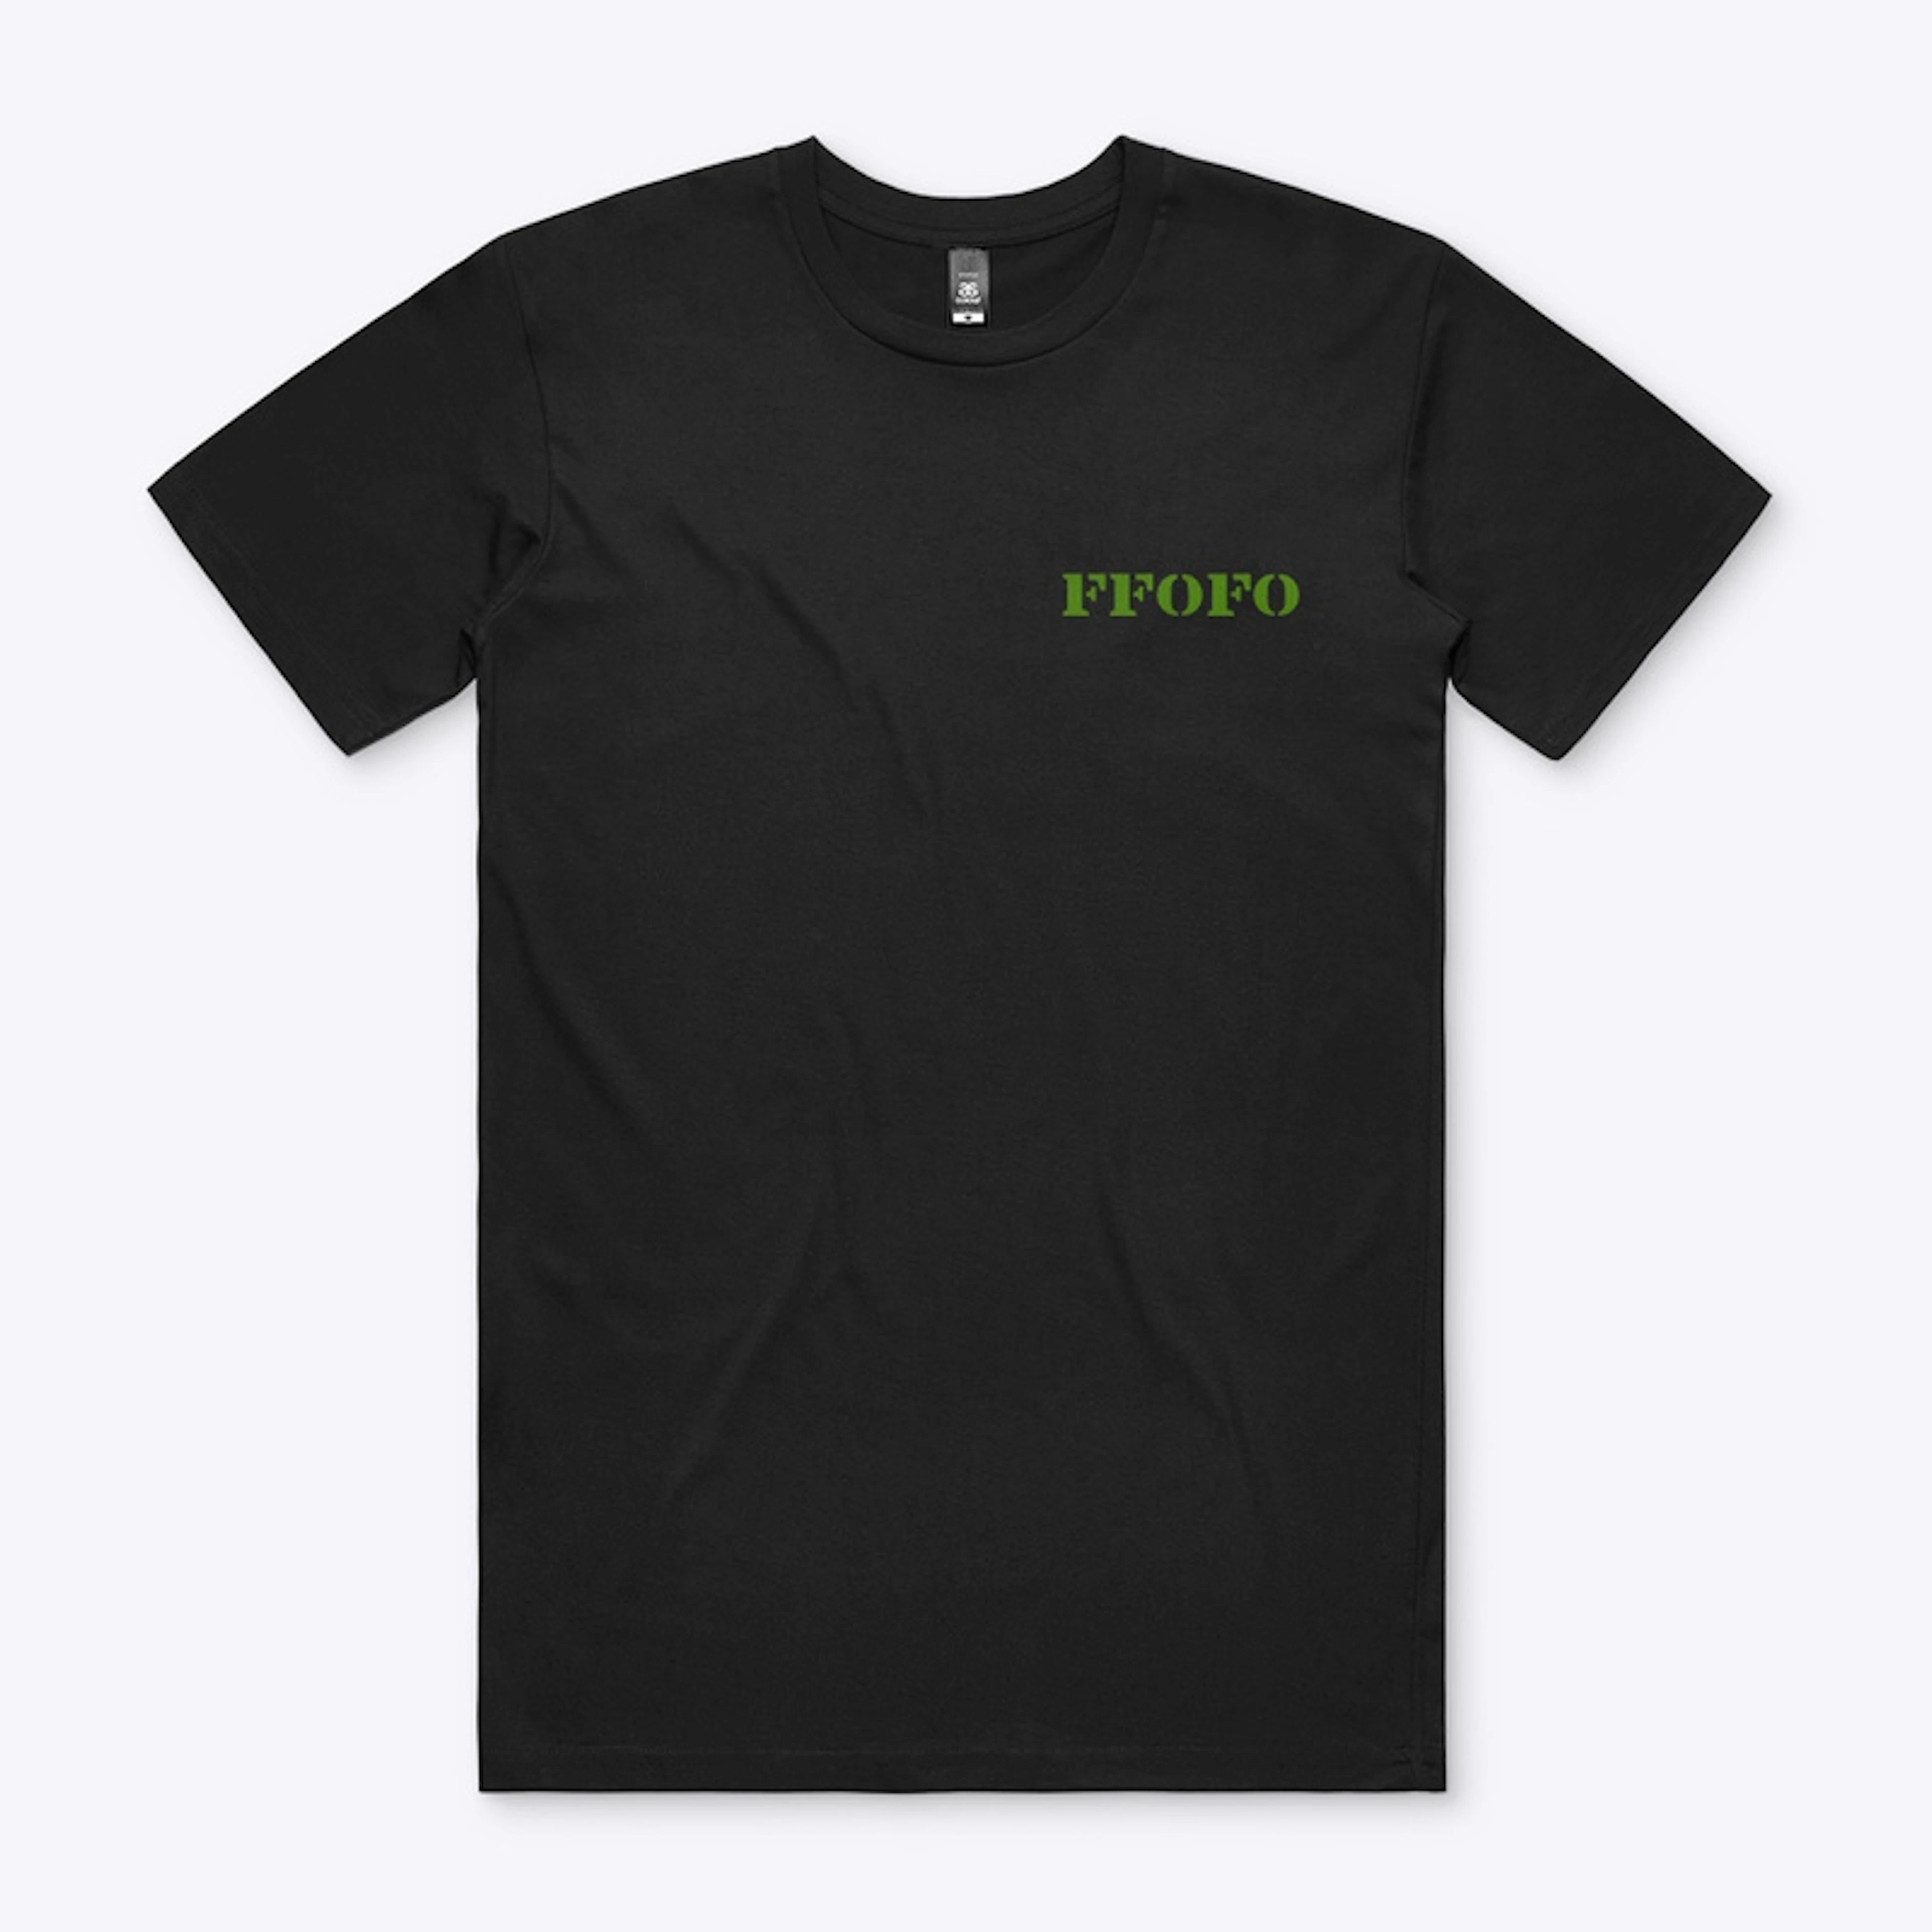 The Sharp Plays Essential FFoFO Tee